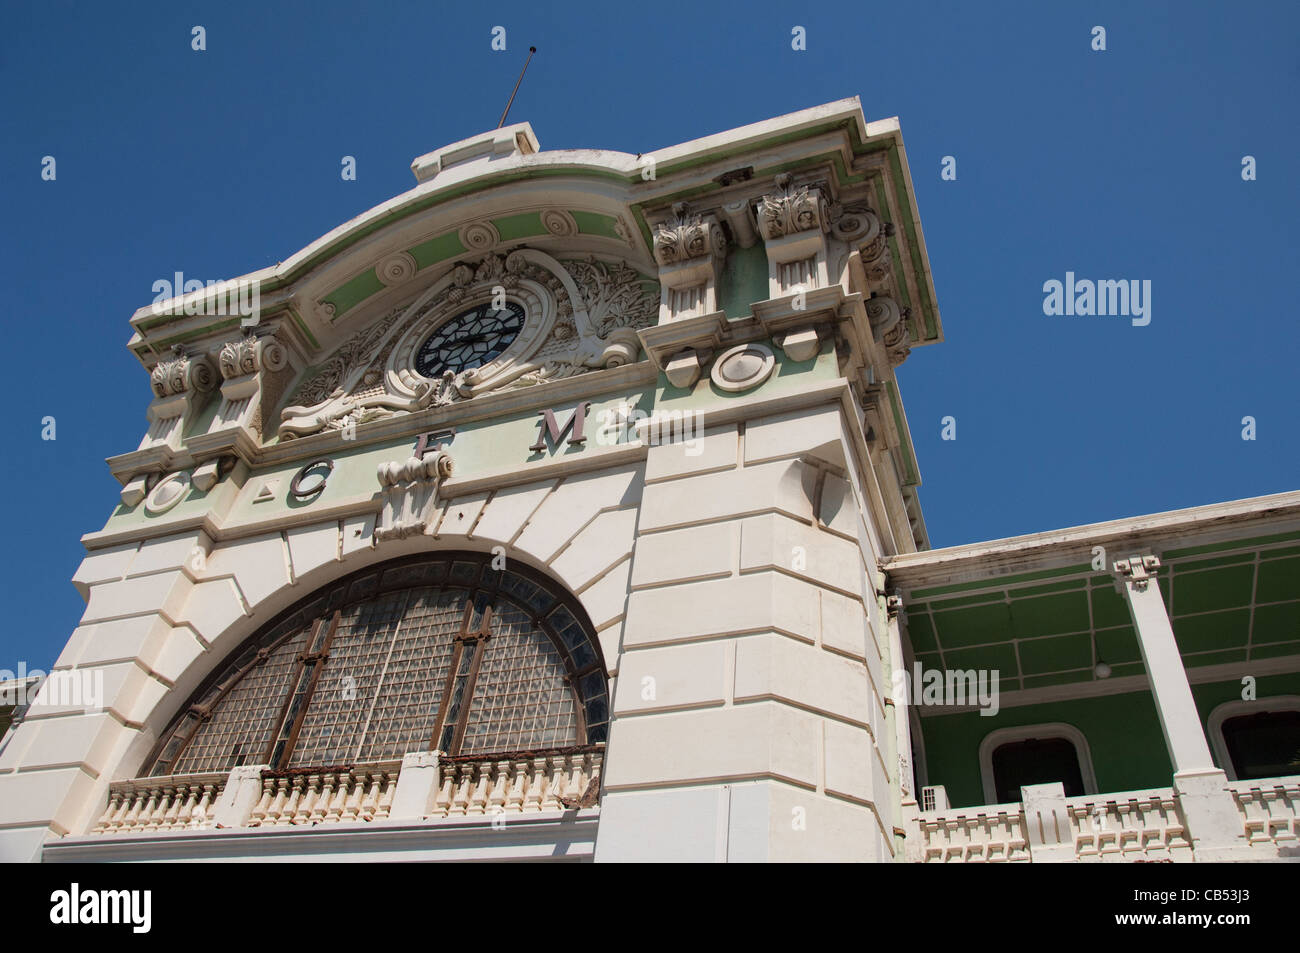 Africa, Mozambique, Maputo. Central Train Station, designed by famous French architect, Gustave Eiffel. Stock Photo